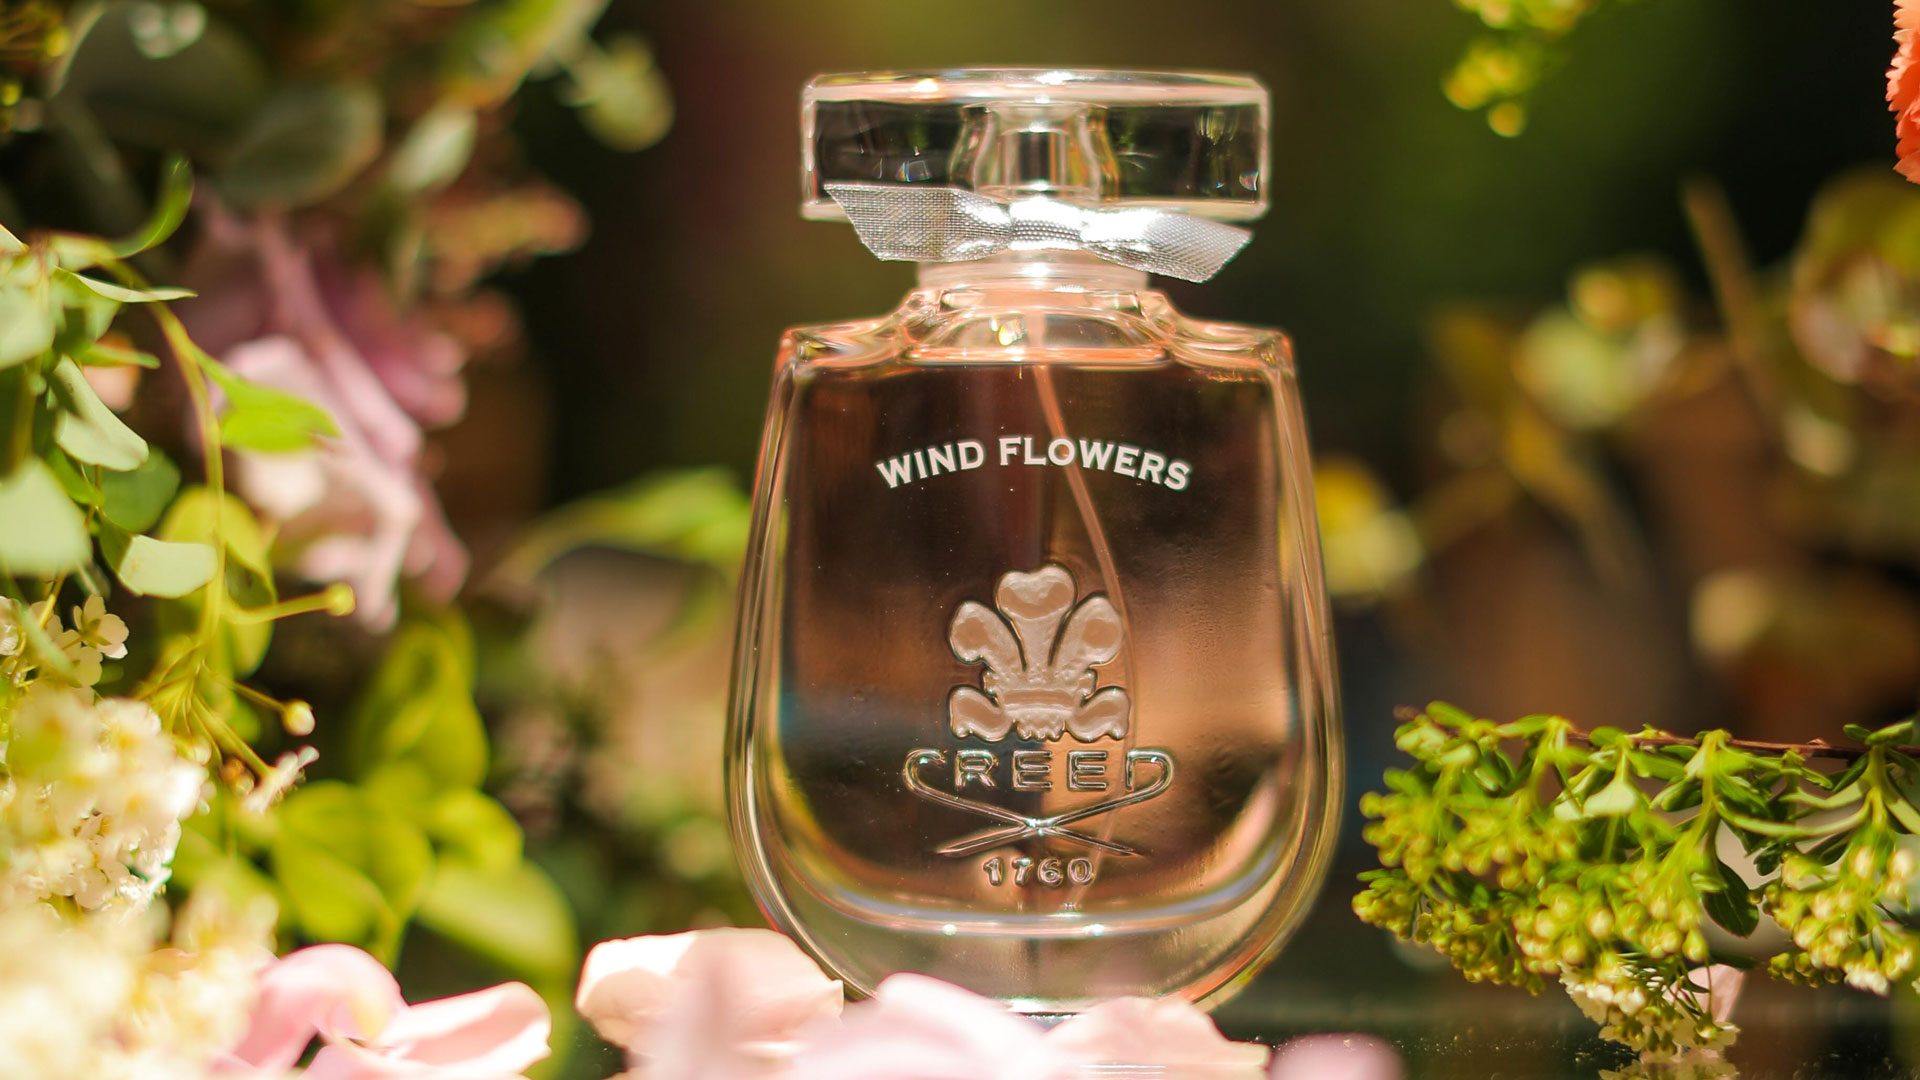 Enhance Your Everyday Beauty with Creed Inspired Perfume for Women